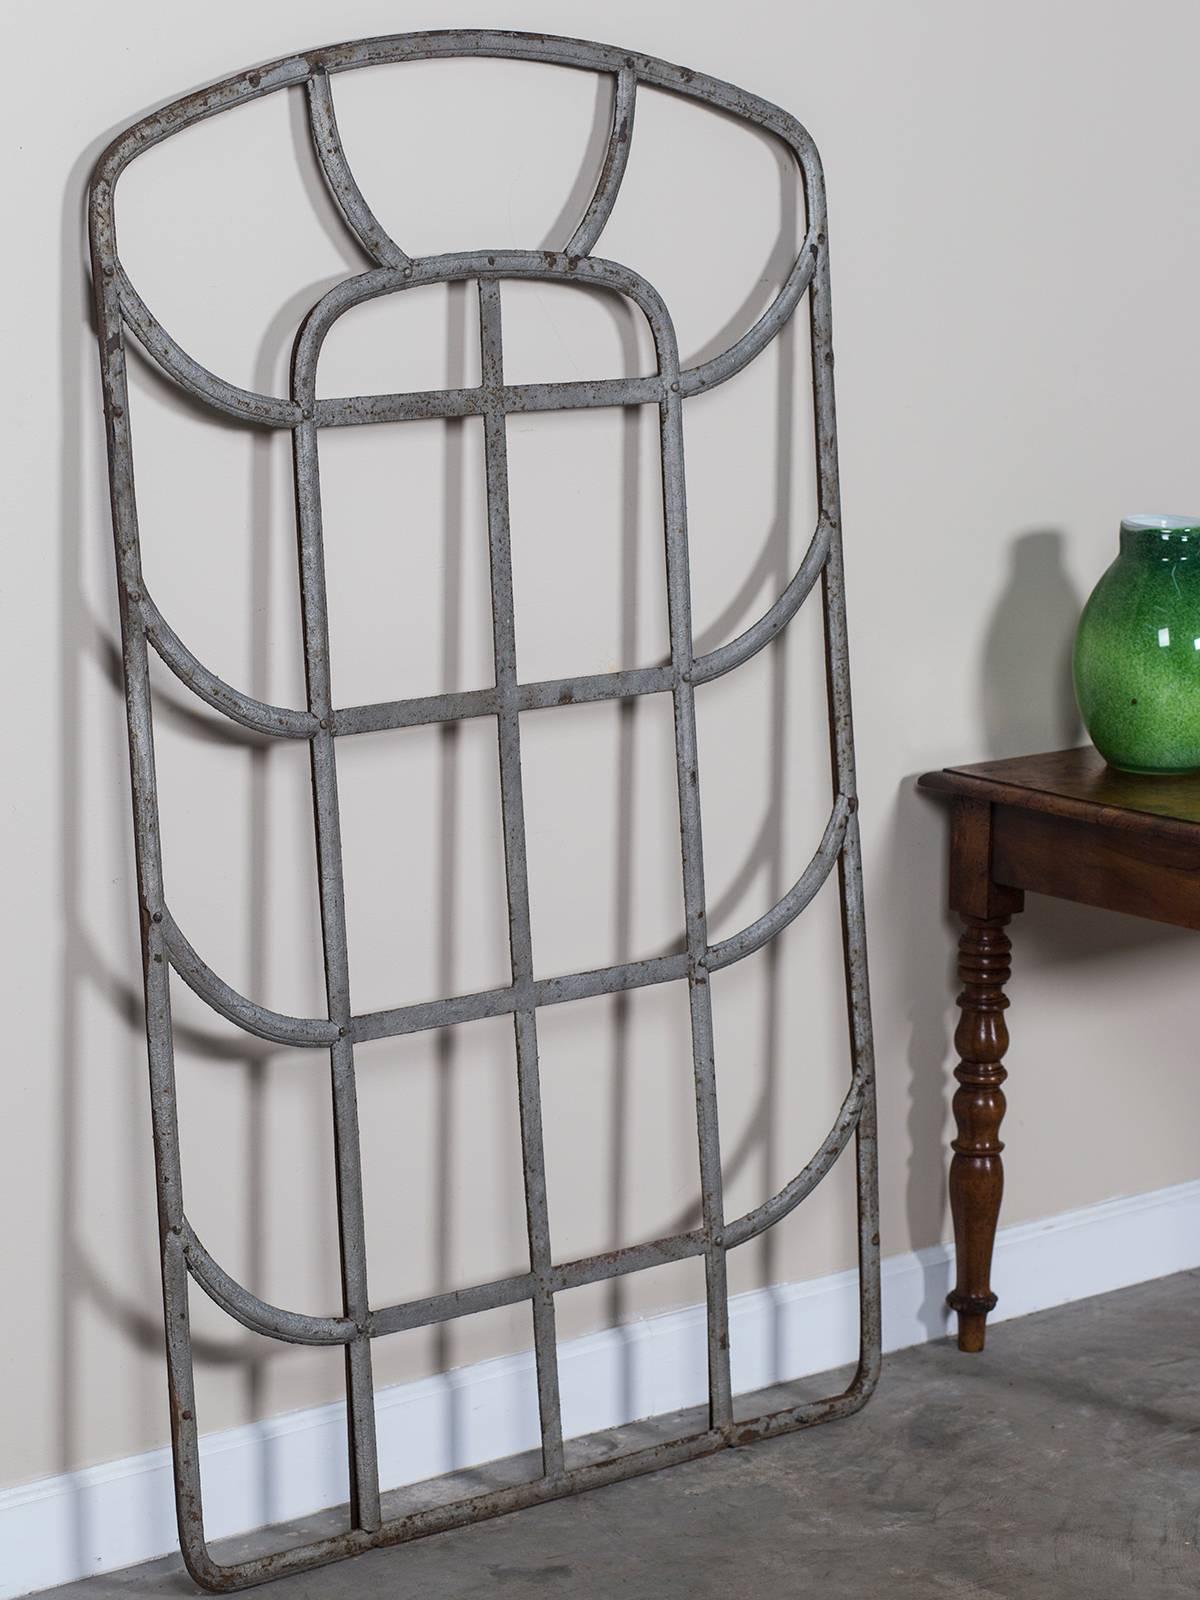 Receive our new selections direct from 1stdibs by email each week. Please click on “Follow Dealer” button below and see them first!

The unusual Silhouette created by the upper lines of this Austrian Art Nouveau iron frame circa 1900 are quite